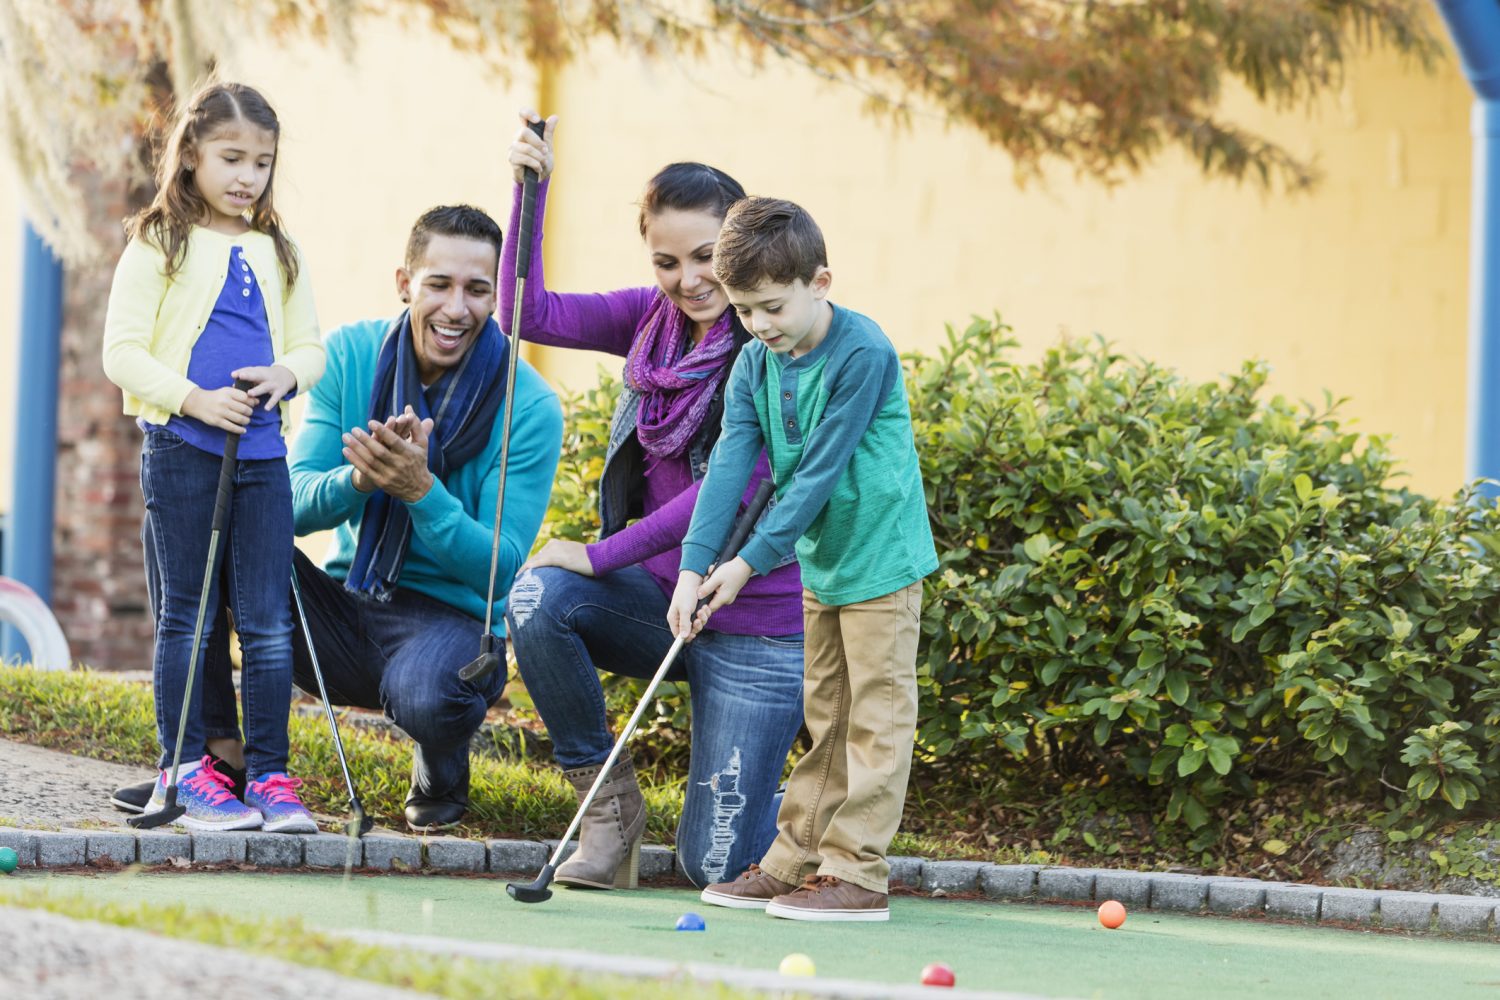 The Best Places to Play Mini Golf near Boston